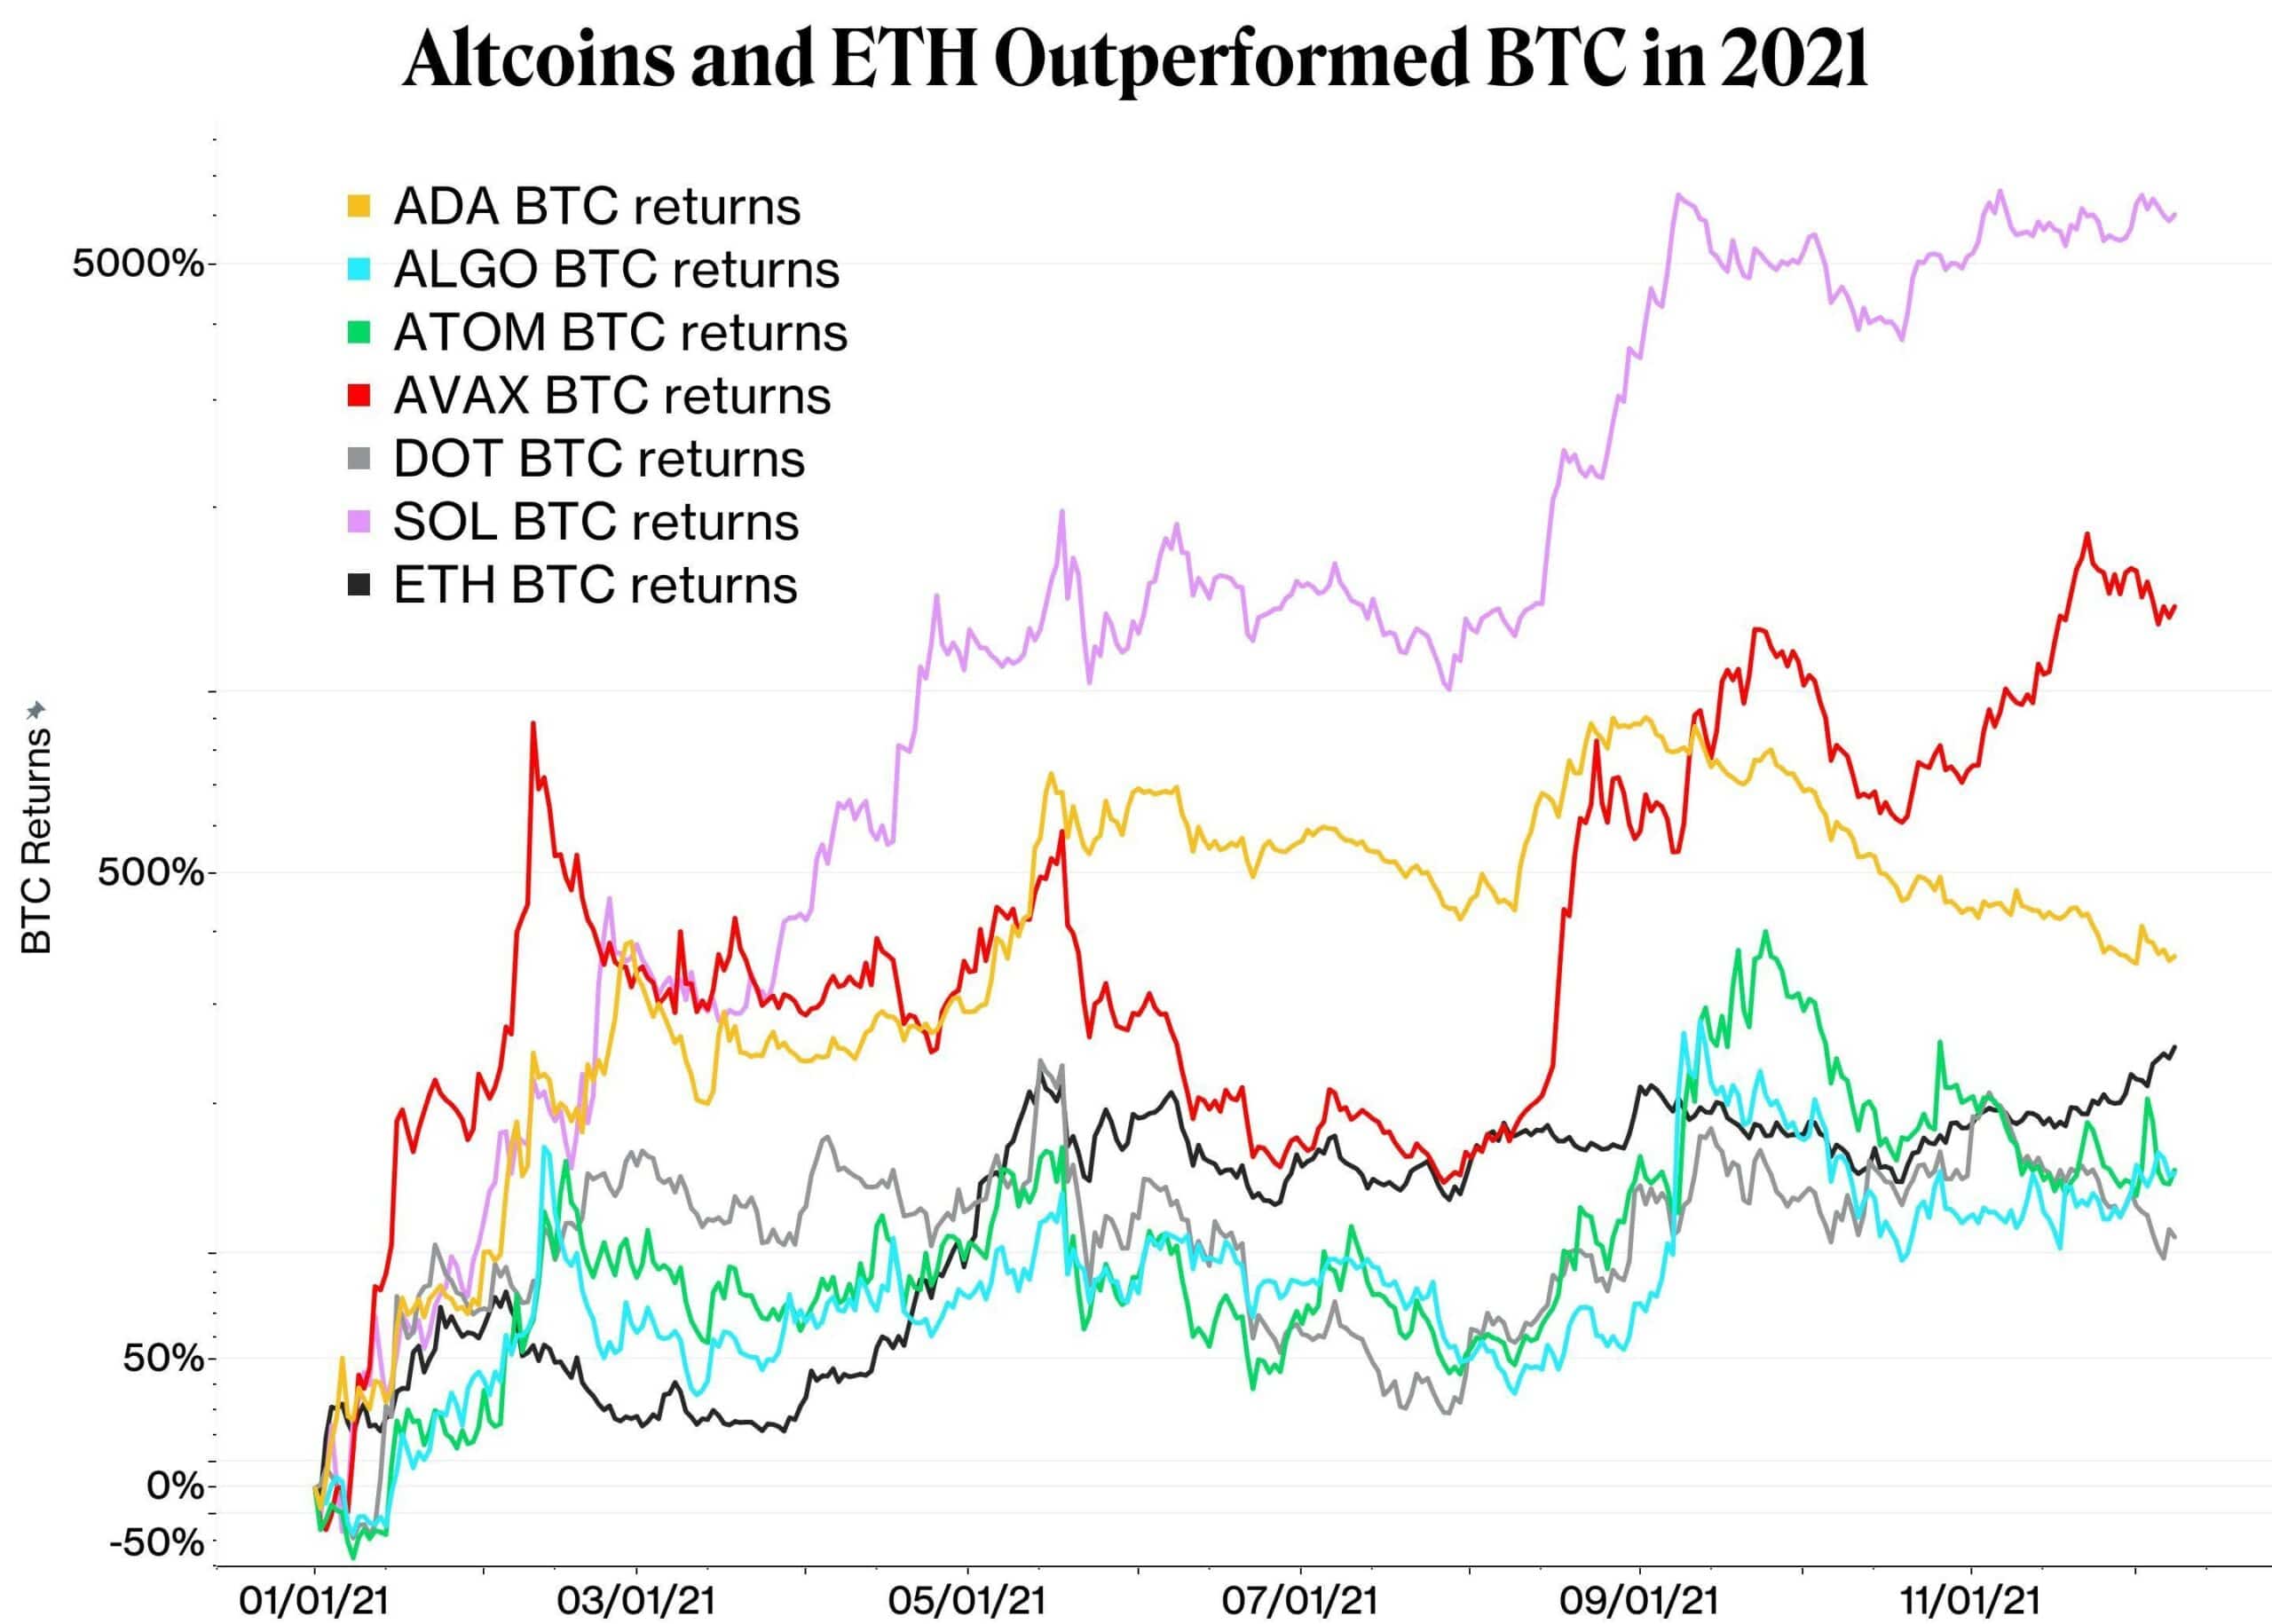 Altcoins and Ether year-to-date returns, priced in bitcoin (logarithmic scale)